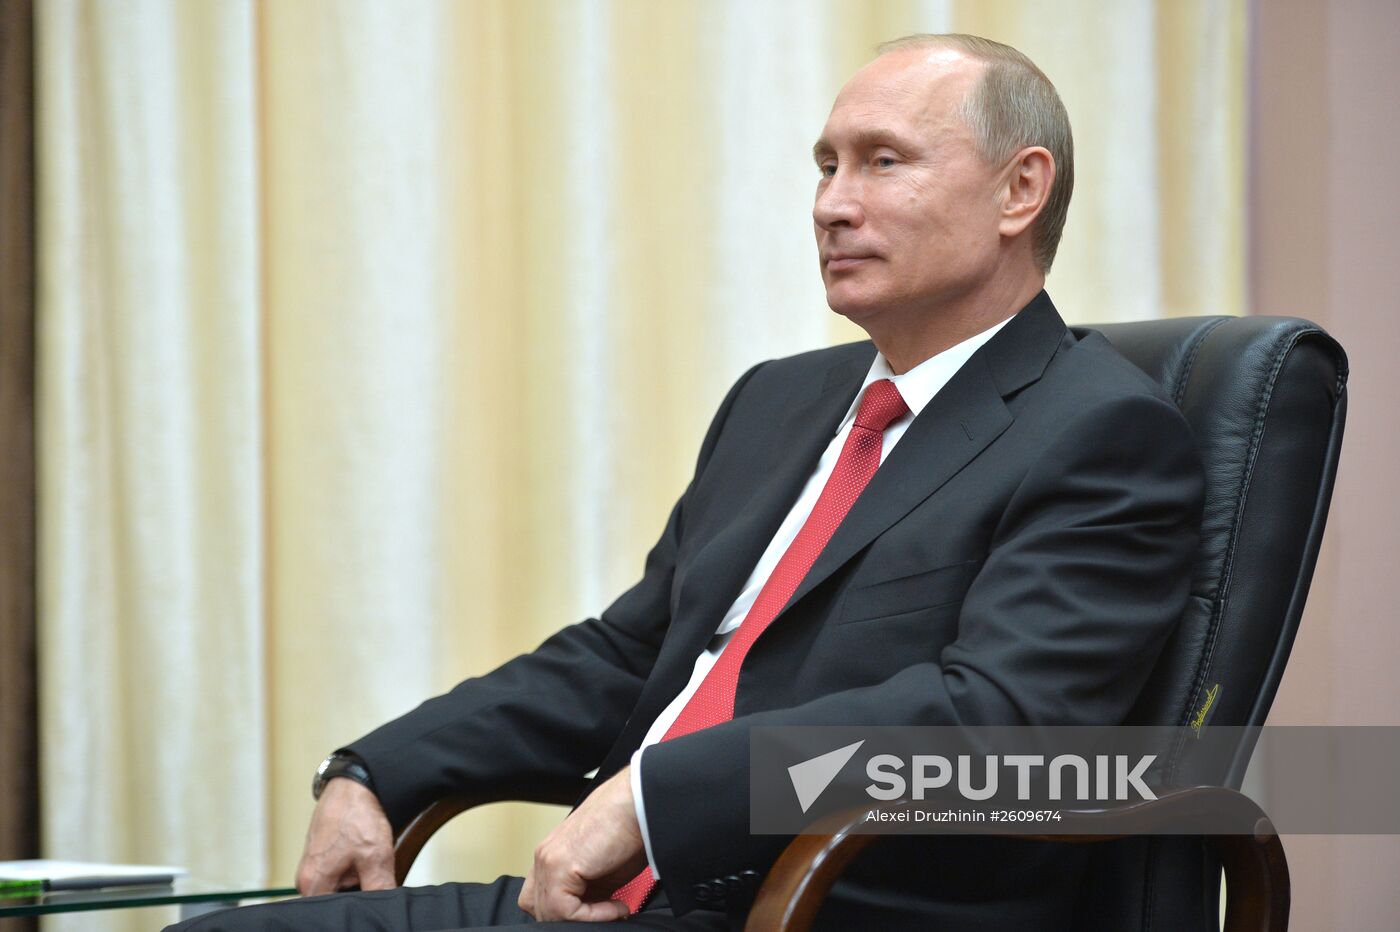 Russian President Vladimir Putin's working visit to Southern Federal District